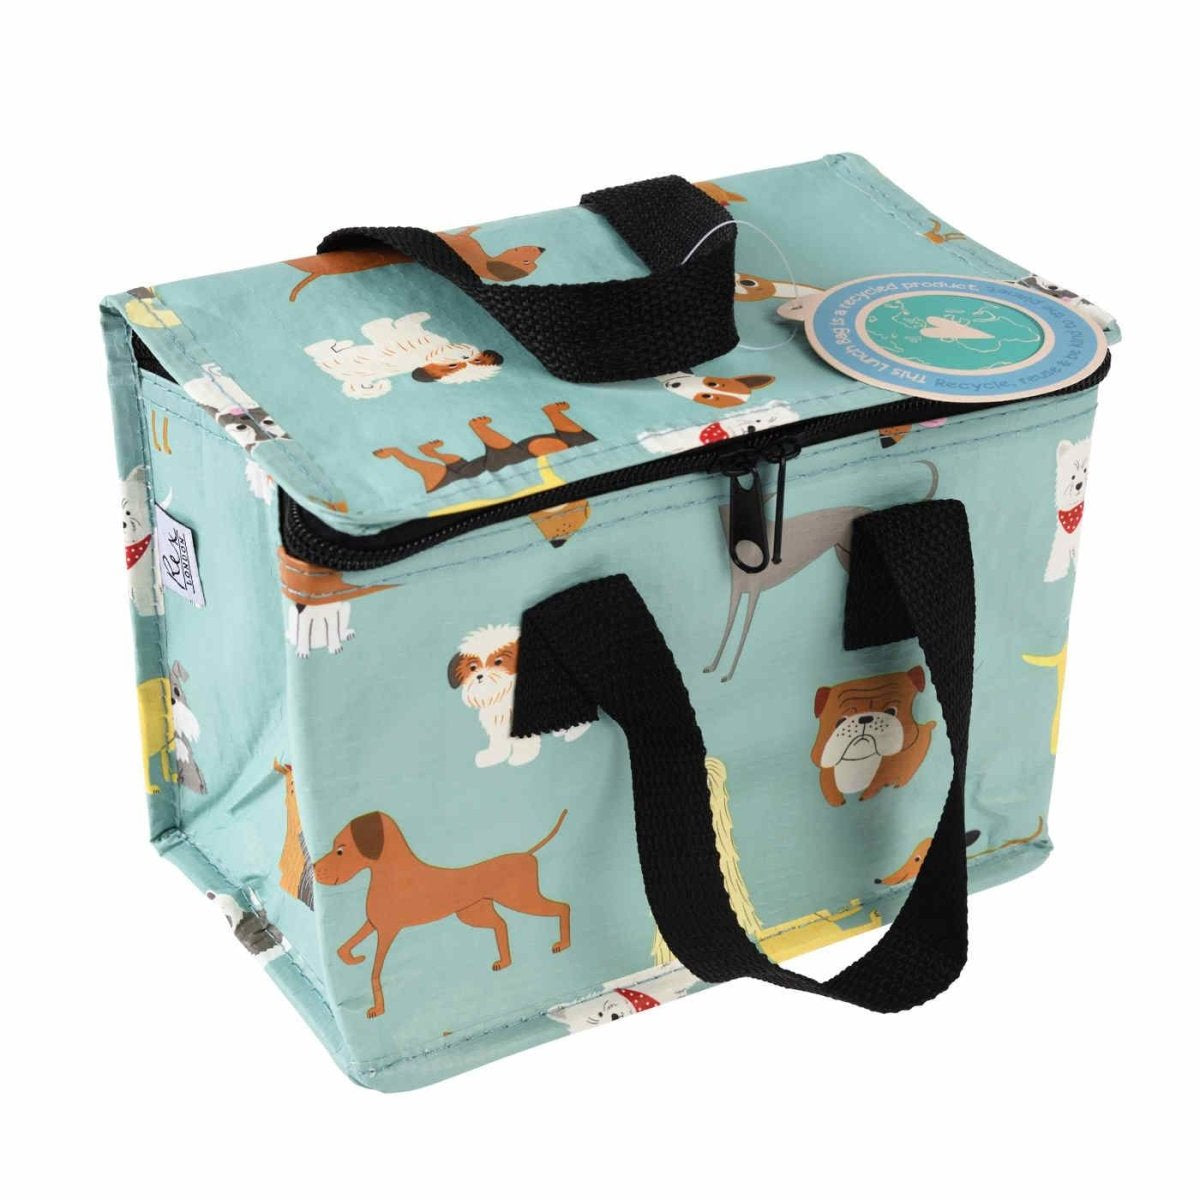 Rex insulated Lunch Bag - best in show